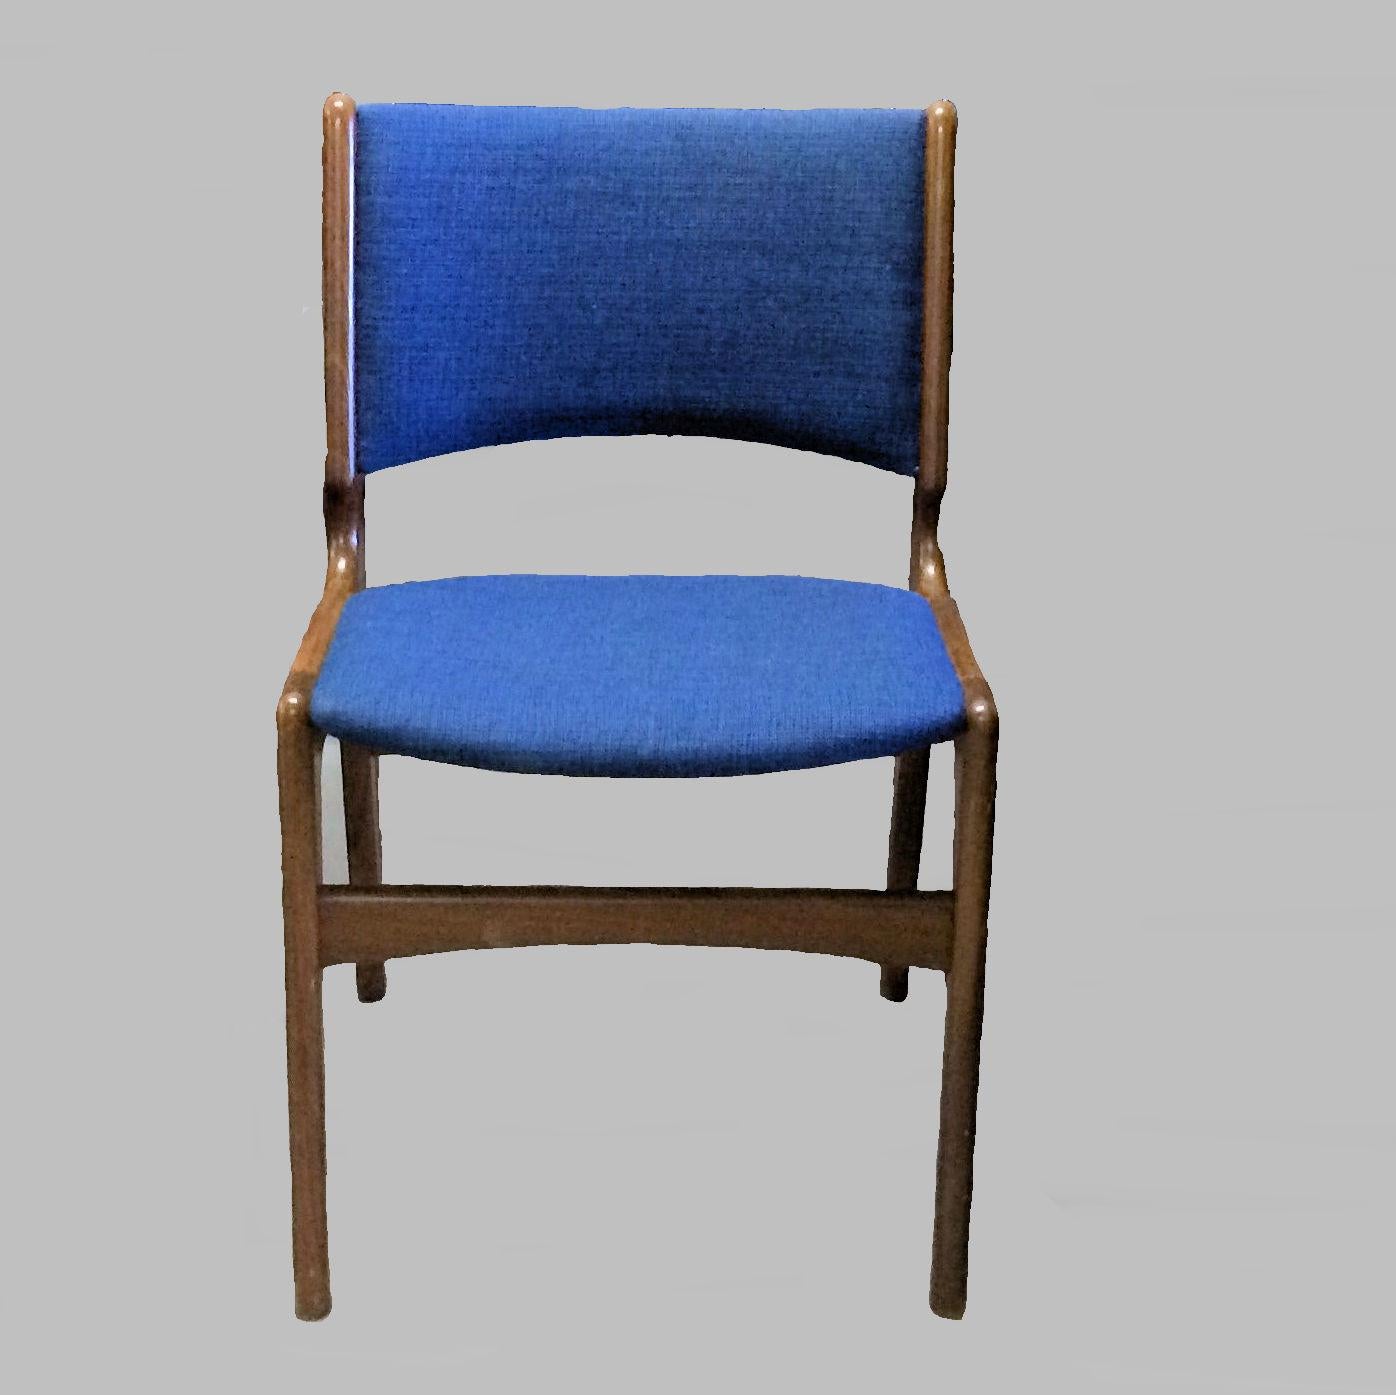 Set of ten Danish fully restored Erik Buch dining chairs made by Oddense Maskinsnedkeri.

The chairs feature a solid teak frame and are as all of Erik Buchs chairs characterized by high-quality materials, solid craftsmanship, Scandinavian